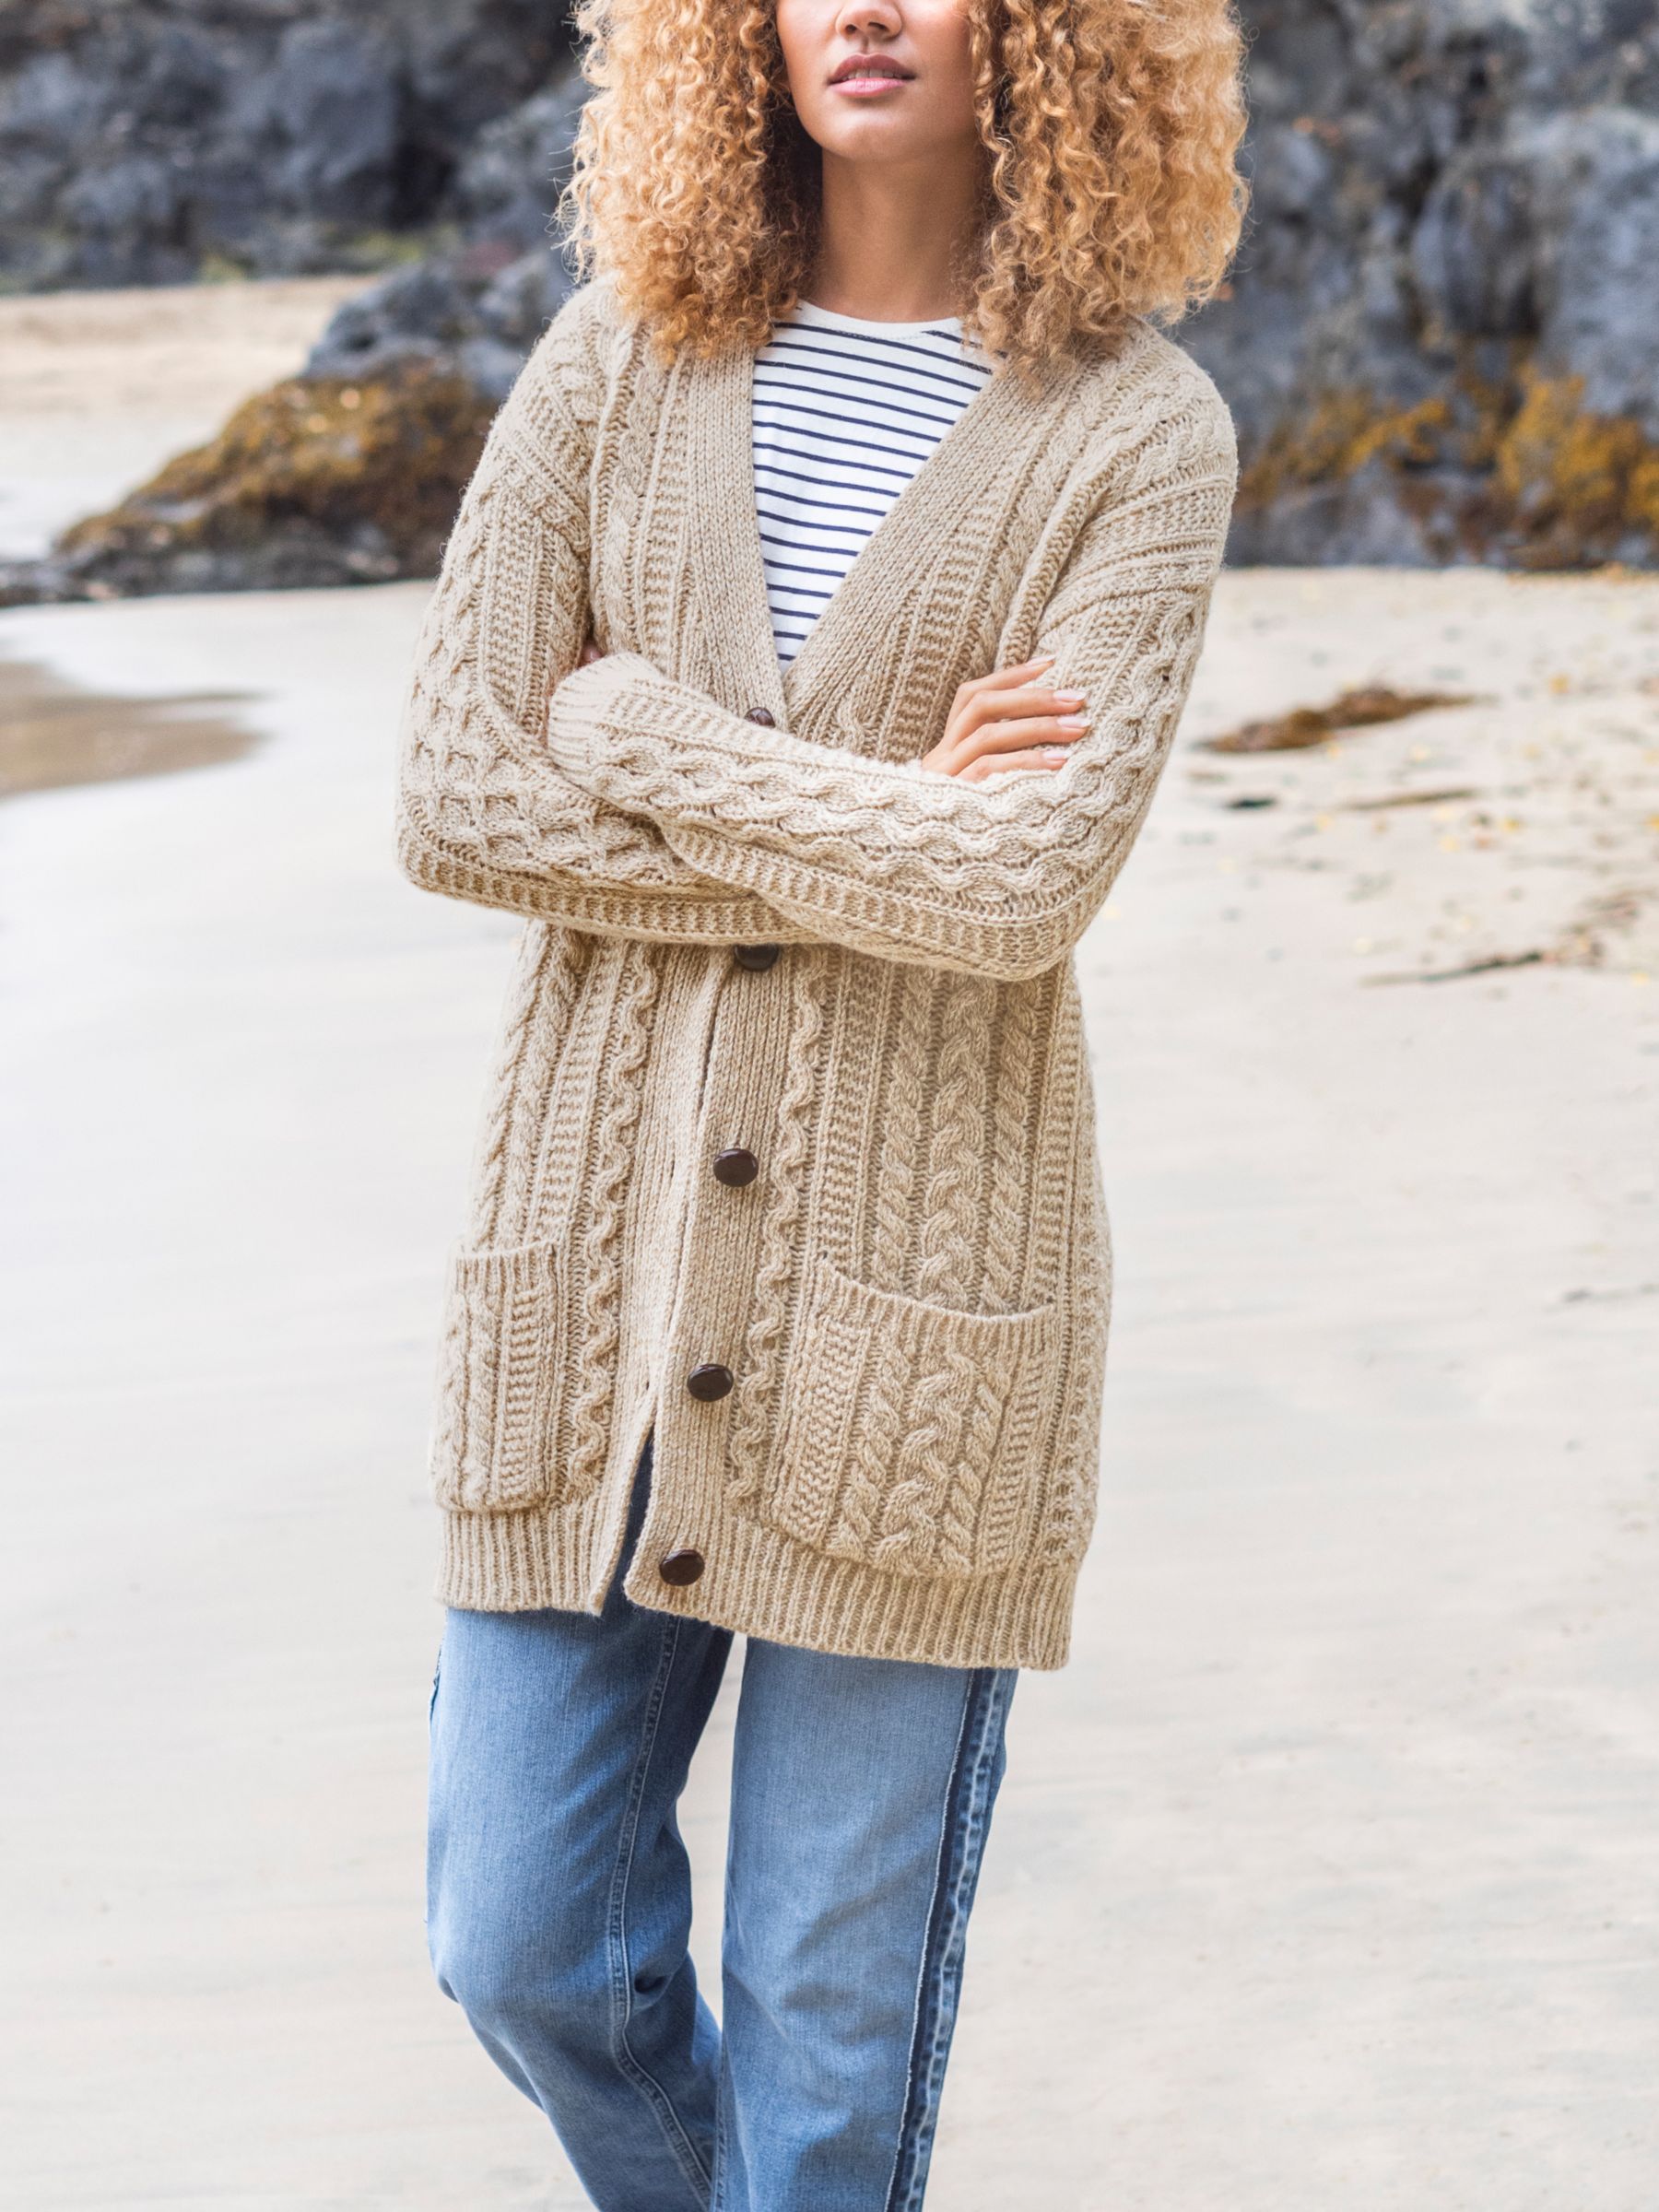 Celtic & Co. Cable Boyfriend Wool Cardigan, Oatmeal at John Lewis